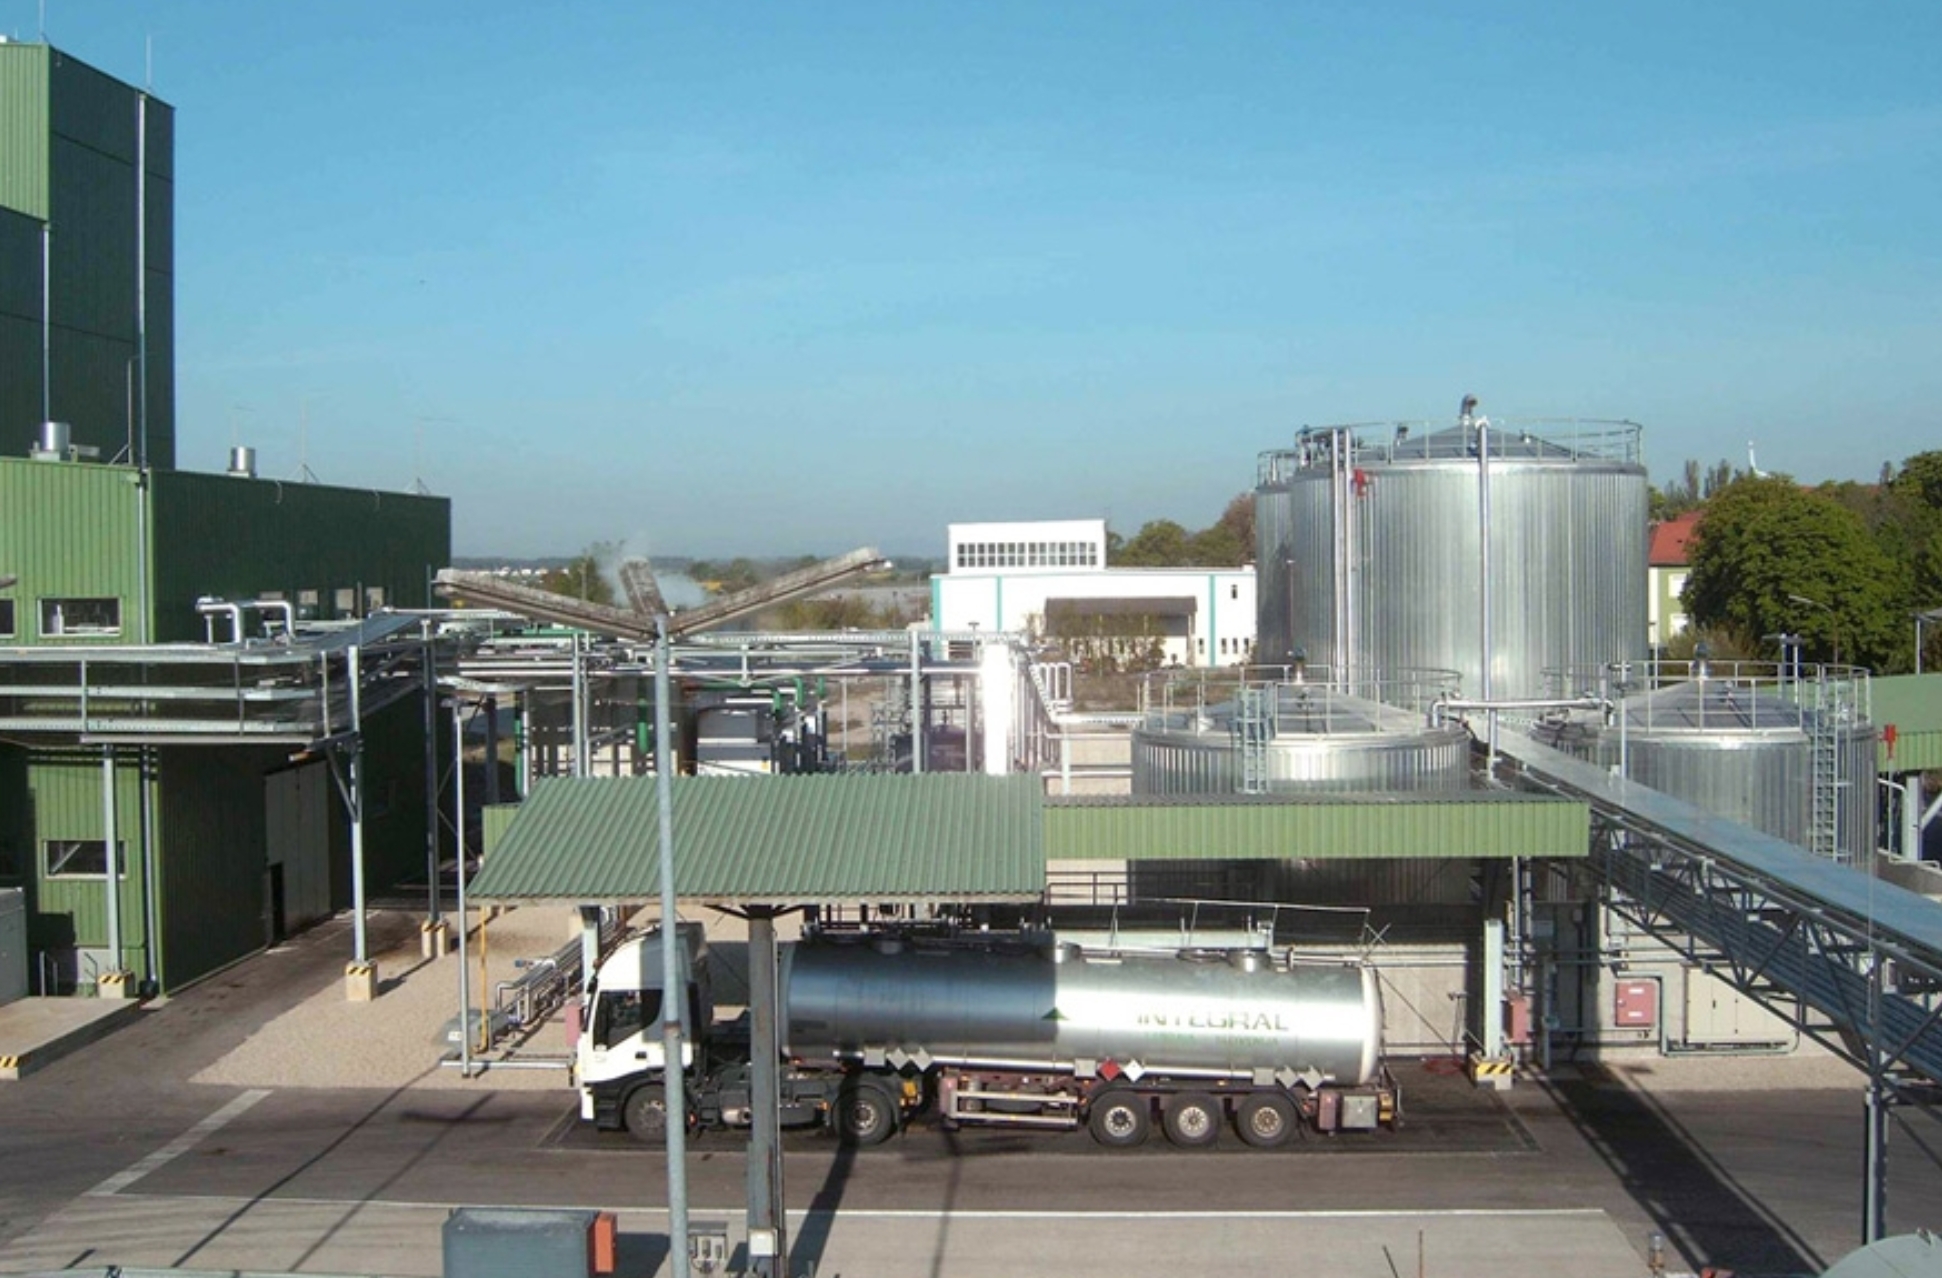 Market is fully supplied with biodiesel